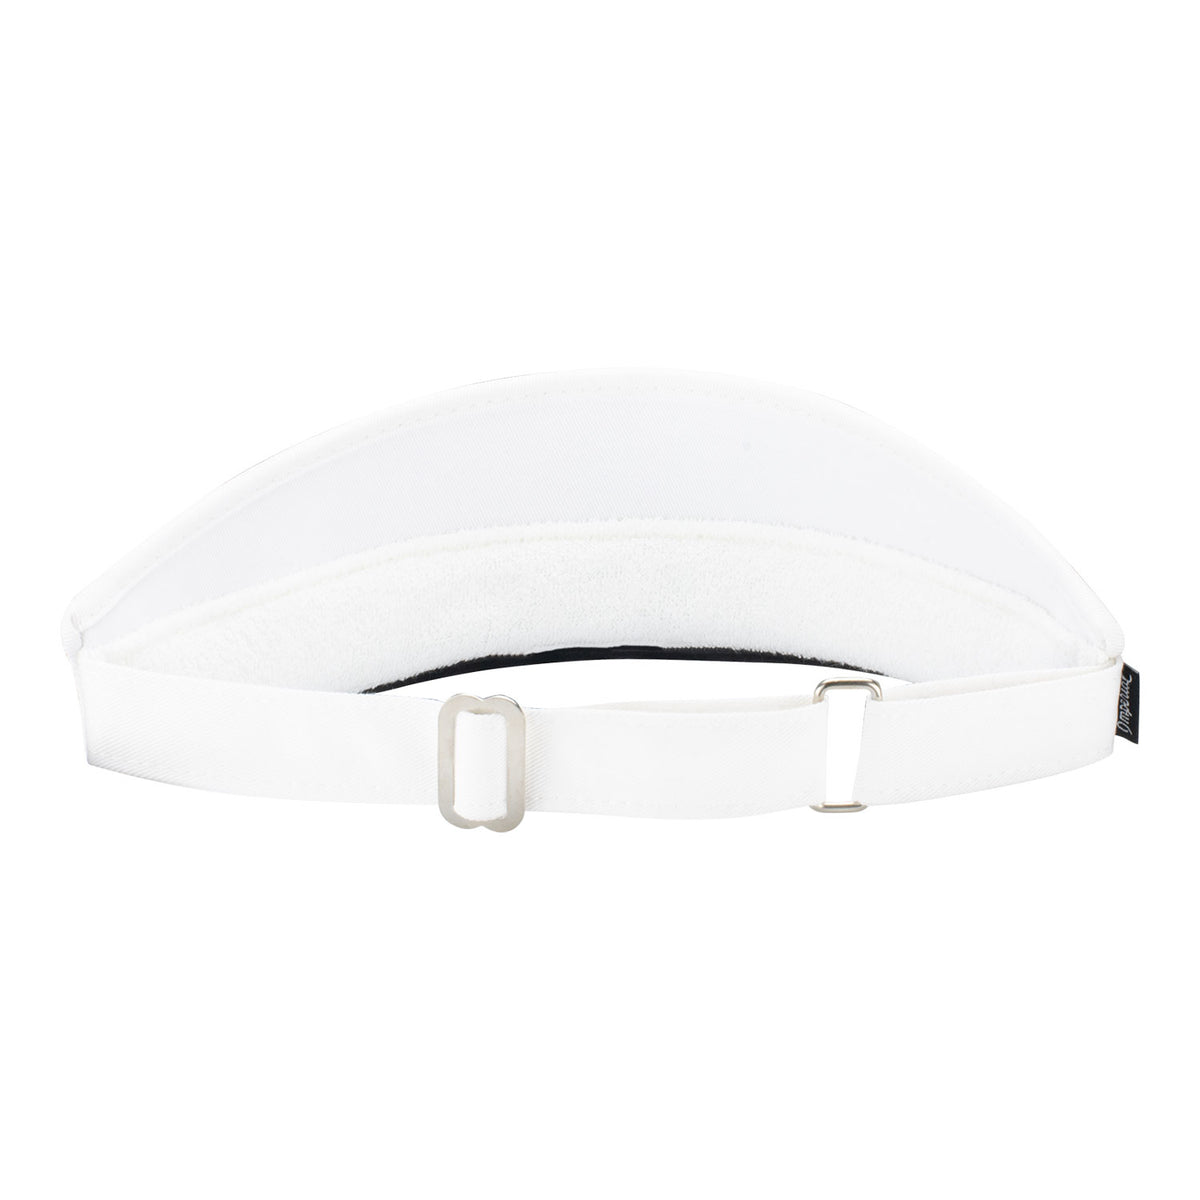 Imperial 3161 - The Original Tour Visor in White - Back View